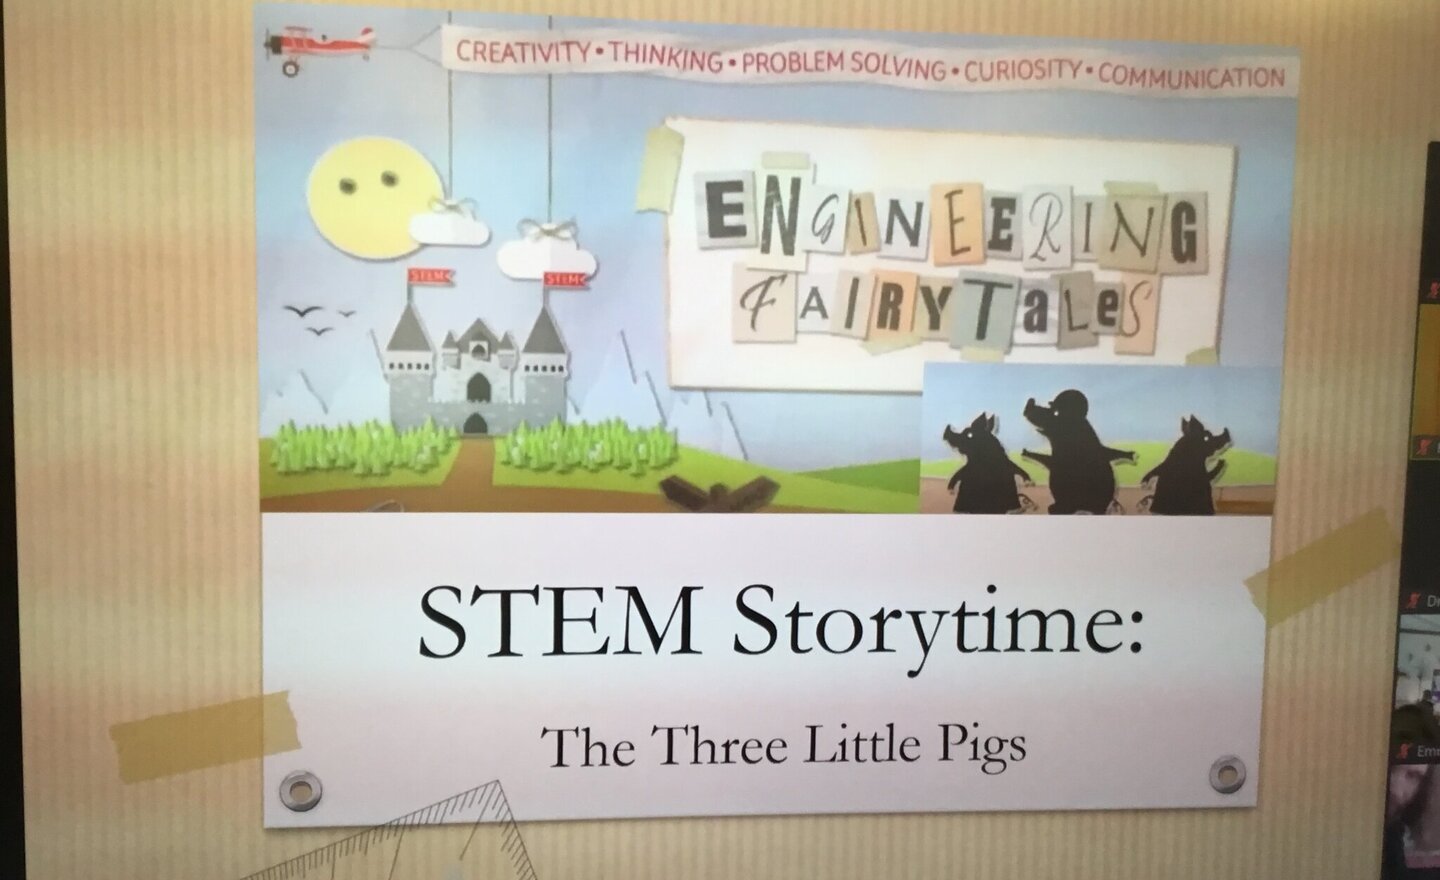 Image of STEM Story Time in Y5